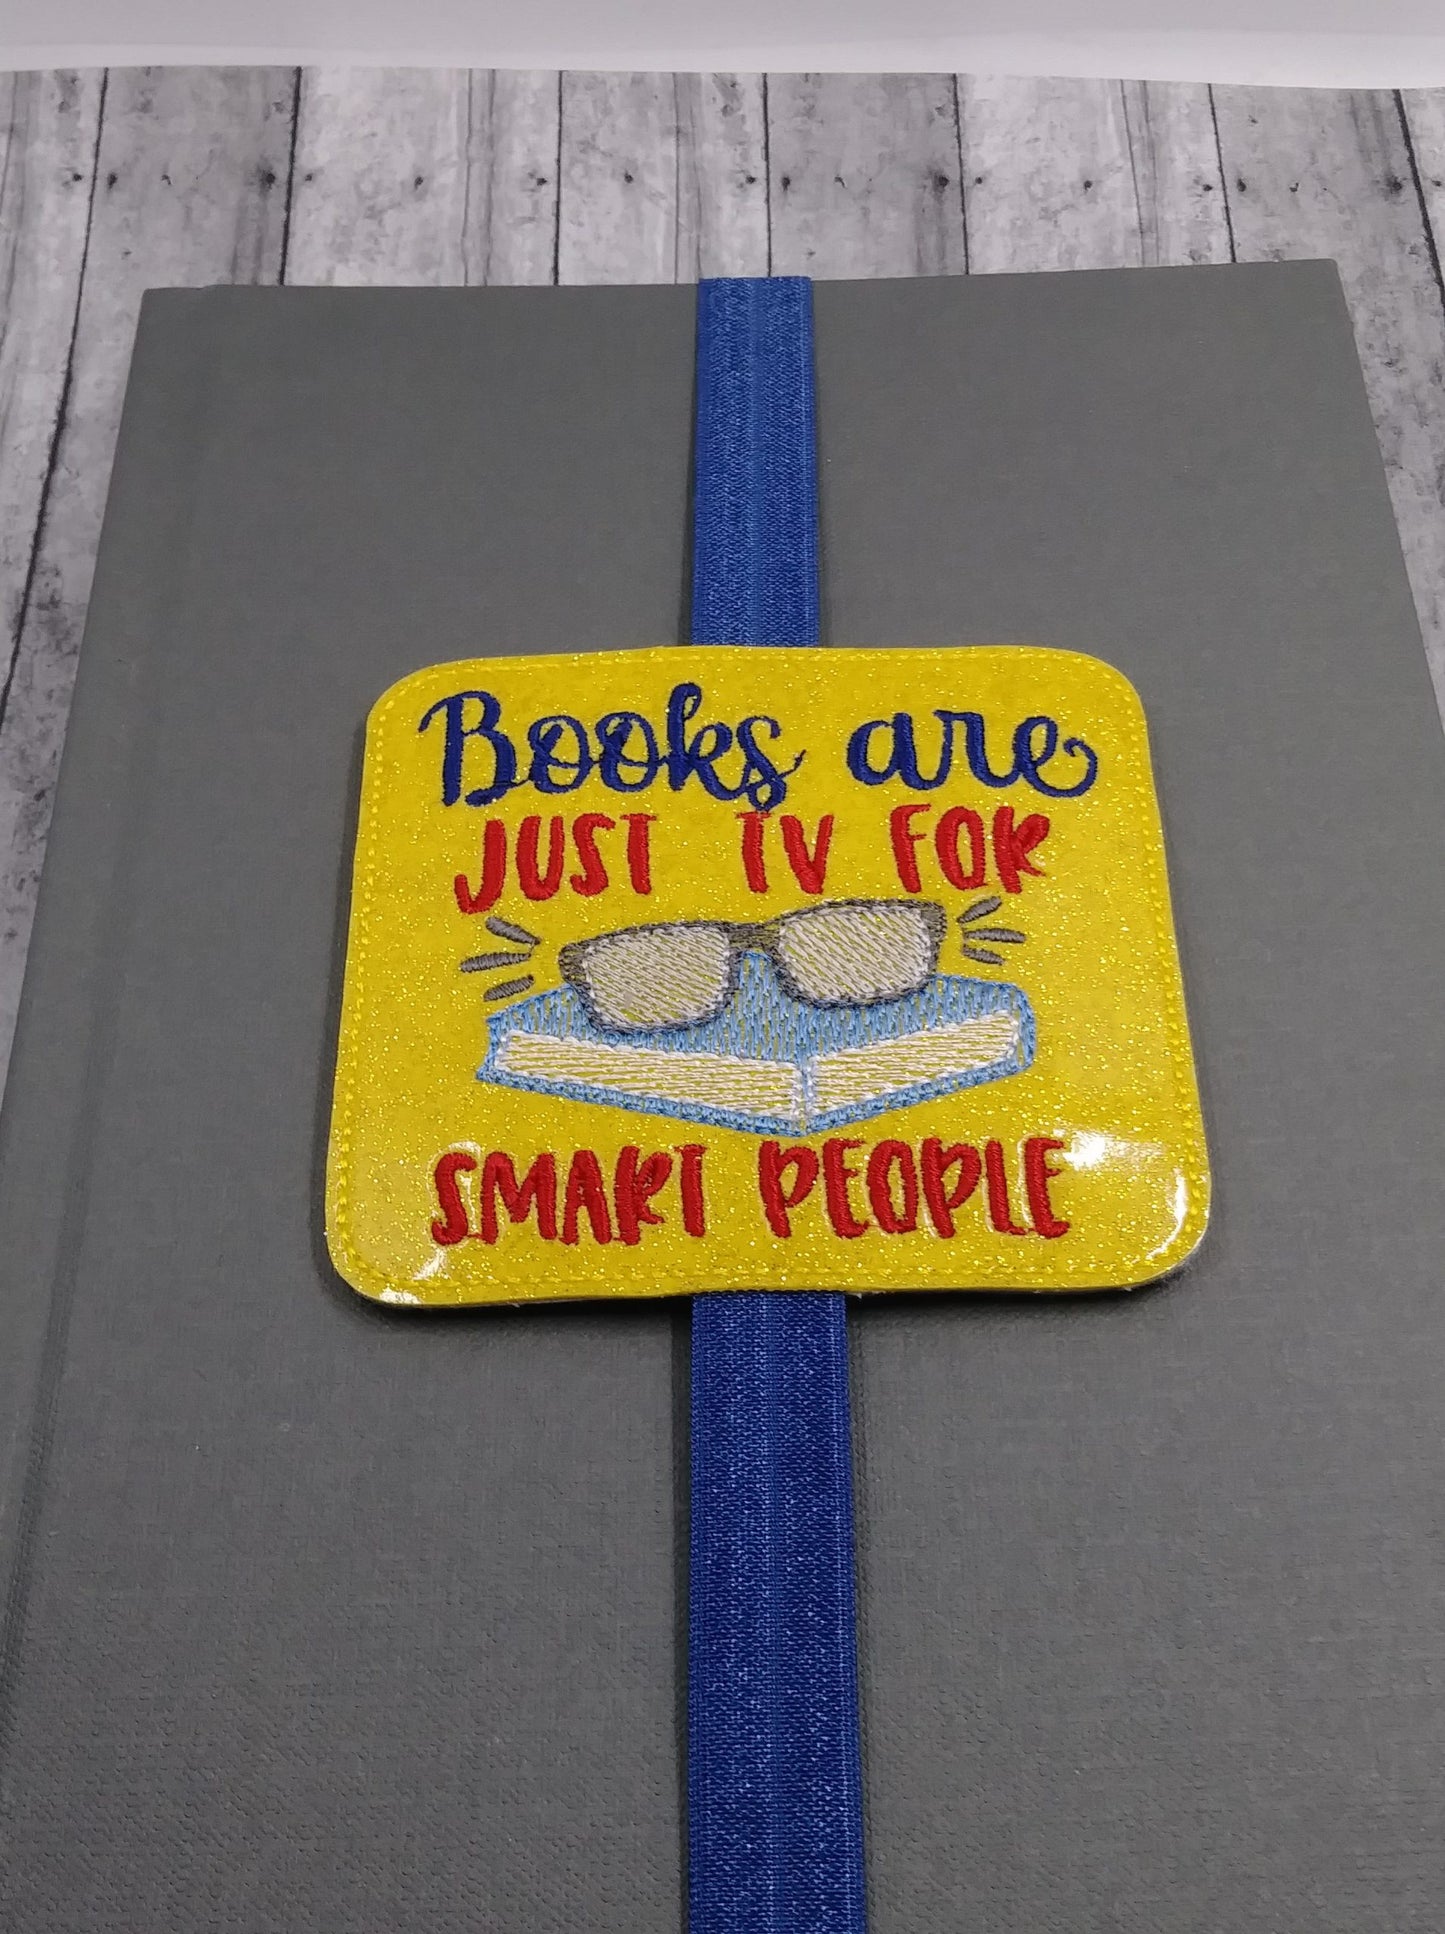 Tv for smart people Book Band - Embroidery Design, Digital File